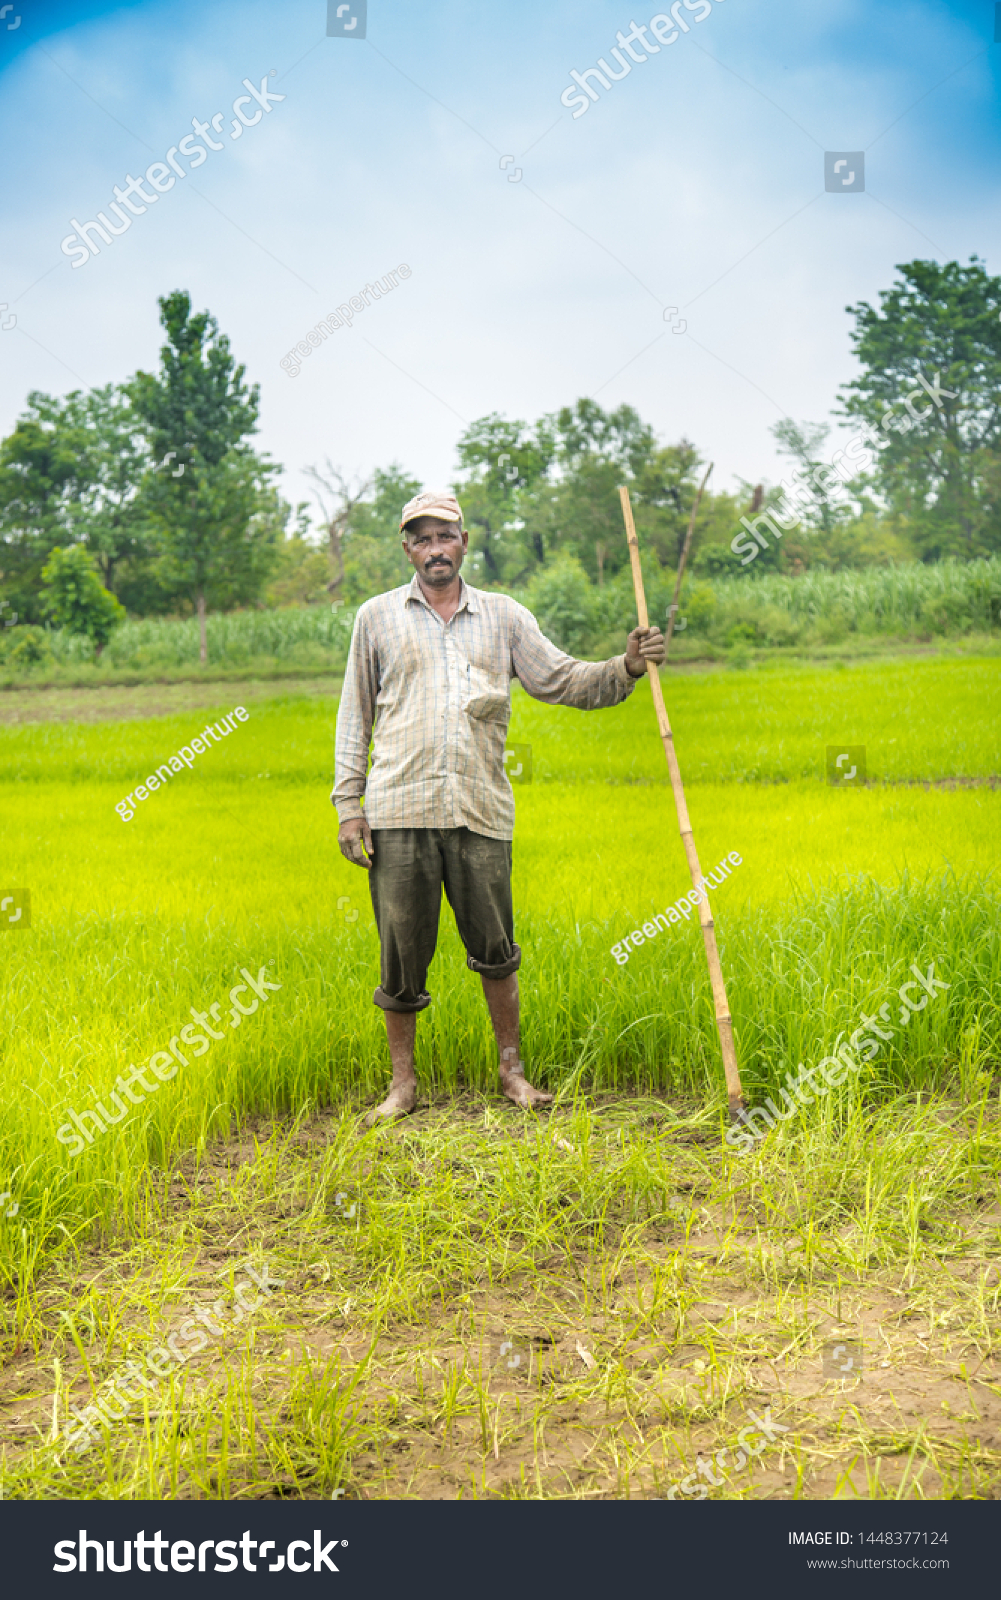 Indian Farmer in Paddy Field. A paddy field is a flooded parcel of arable land used for growing rice.  #1448377124